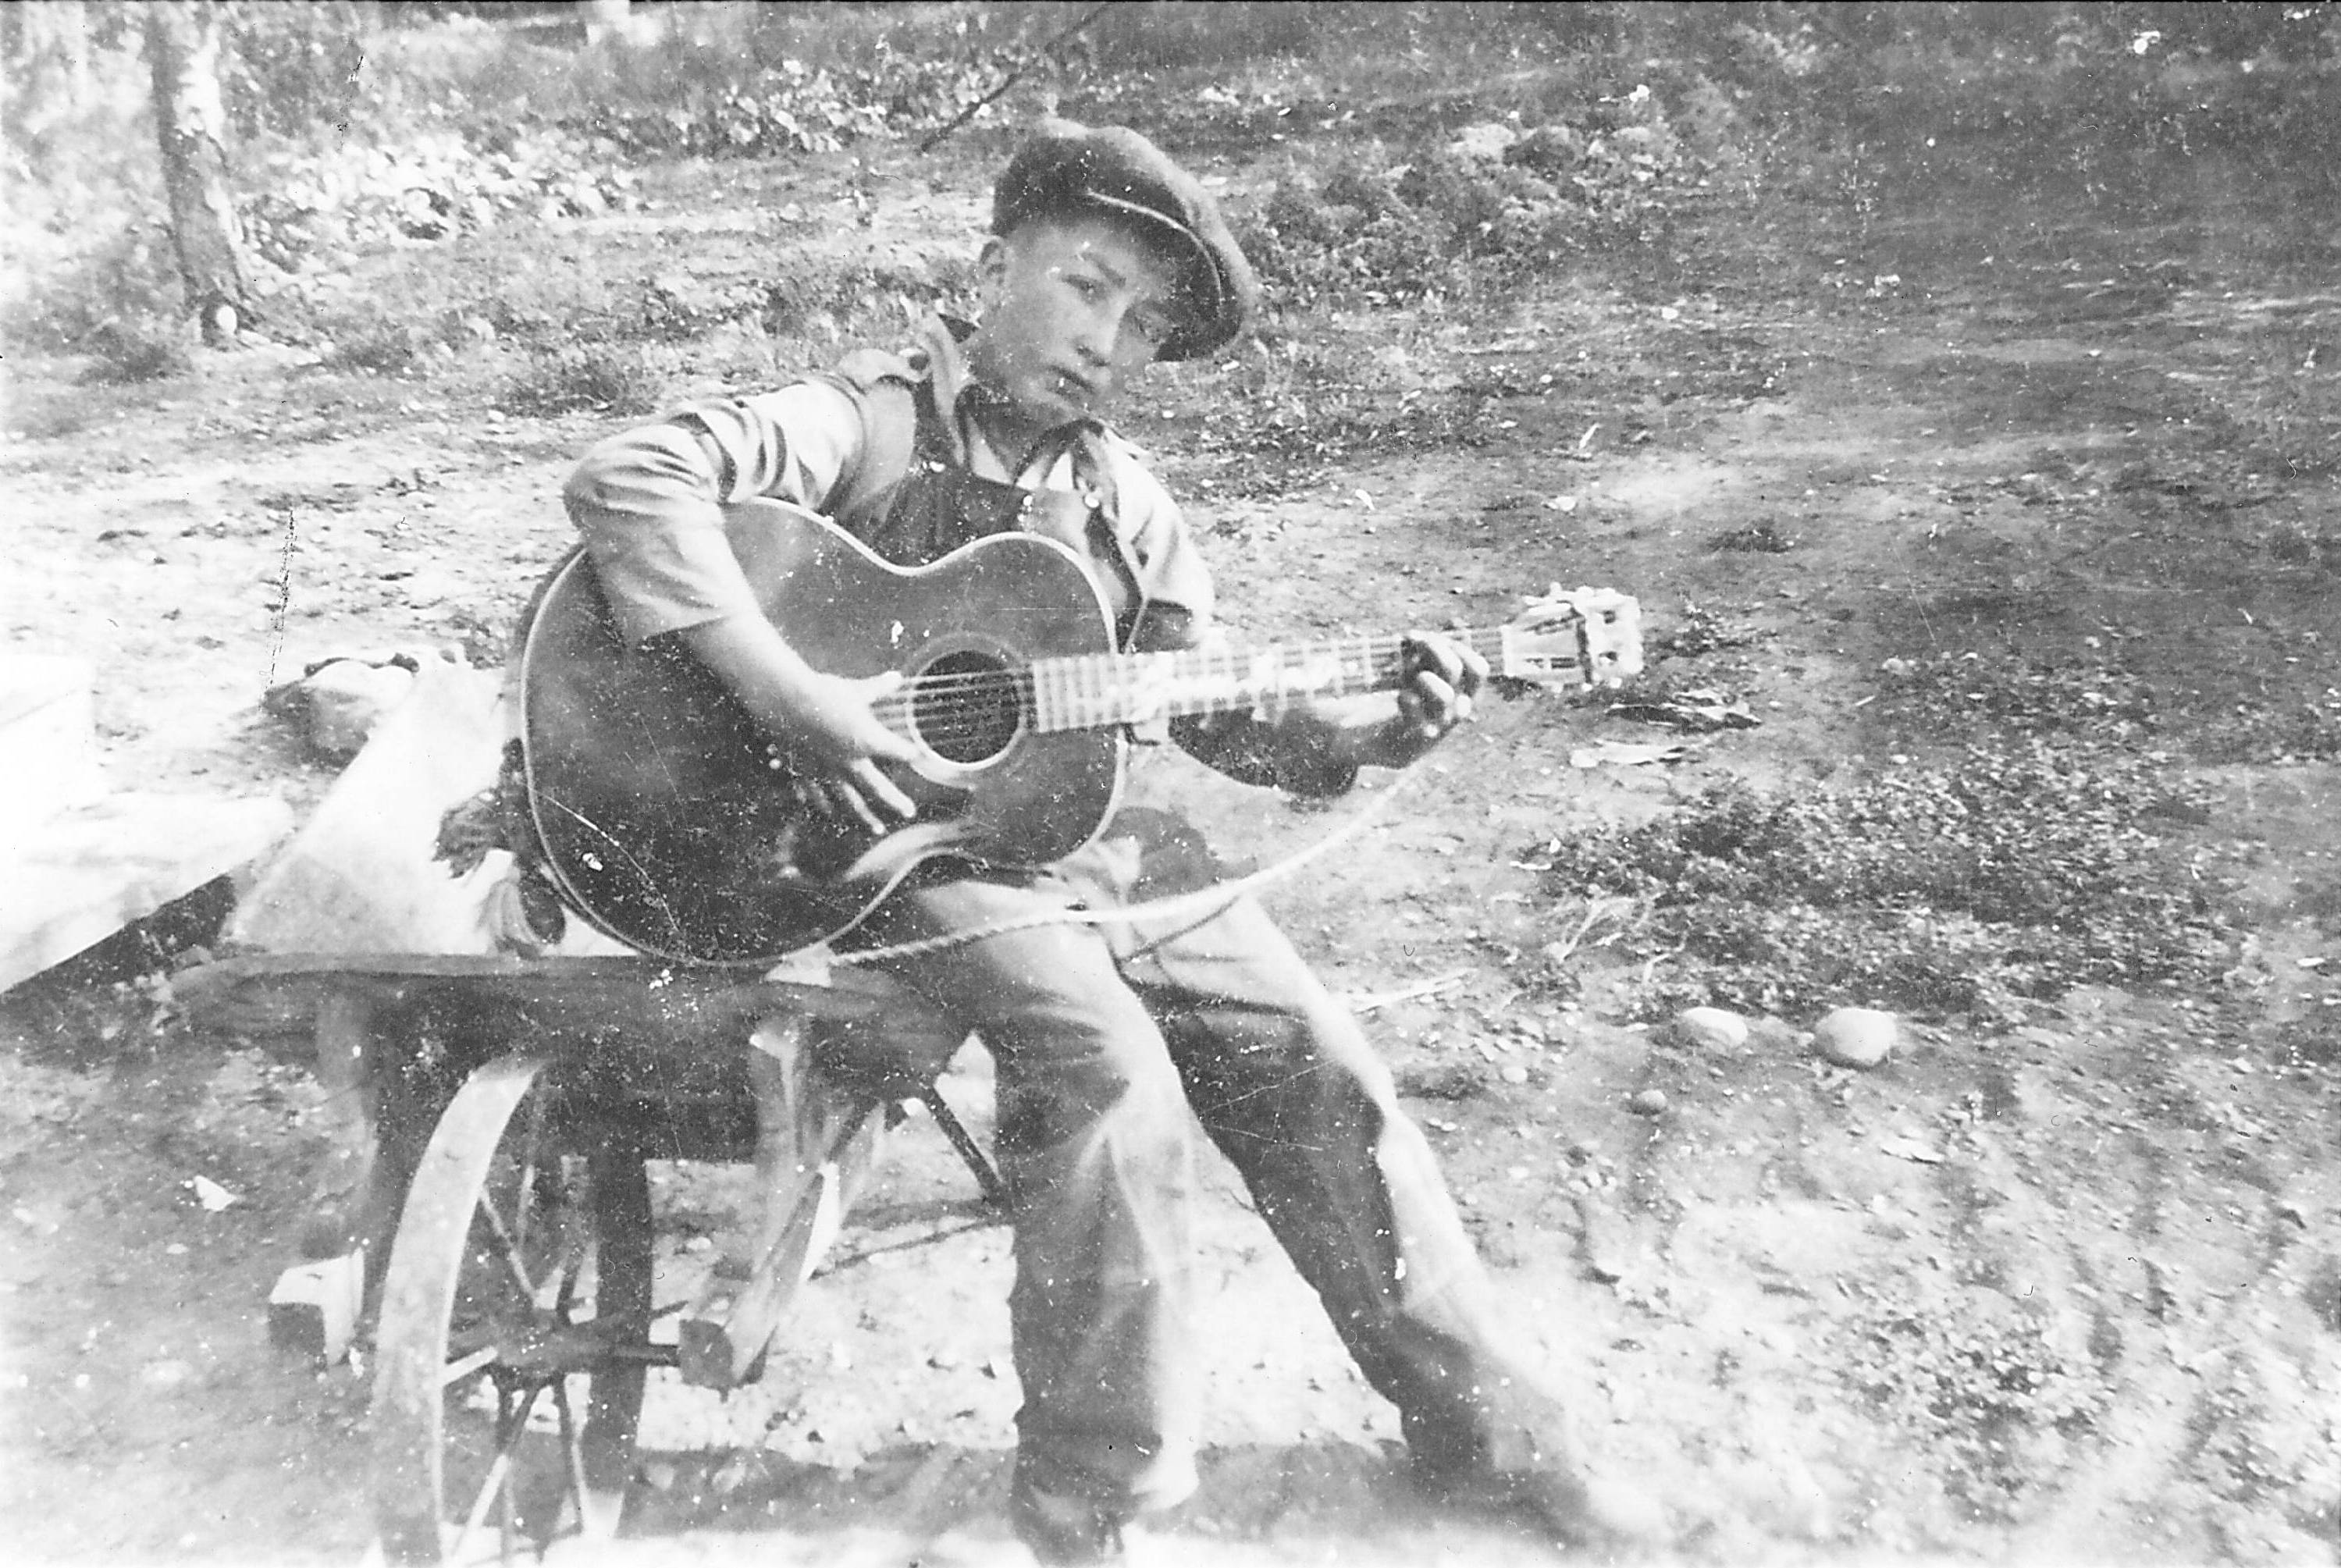 This young gentleman has a suave look about him. Perhaps it comes from his casual stance holding the guitar and perched on the edge of a wheel barrow; or his inquisitive arched brow. In any case we do not have record who this may be- if you have any leads please let us know!
990.4.106.37 / Ward, Vera